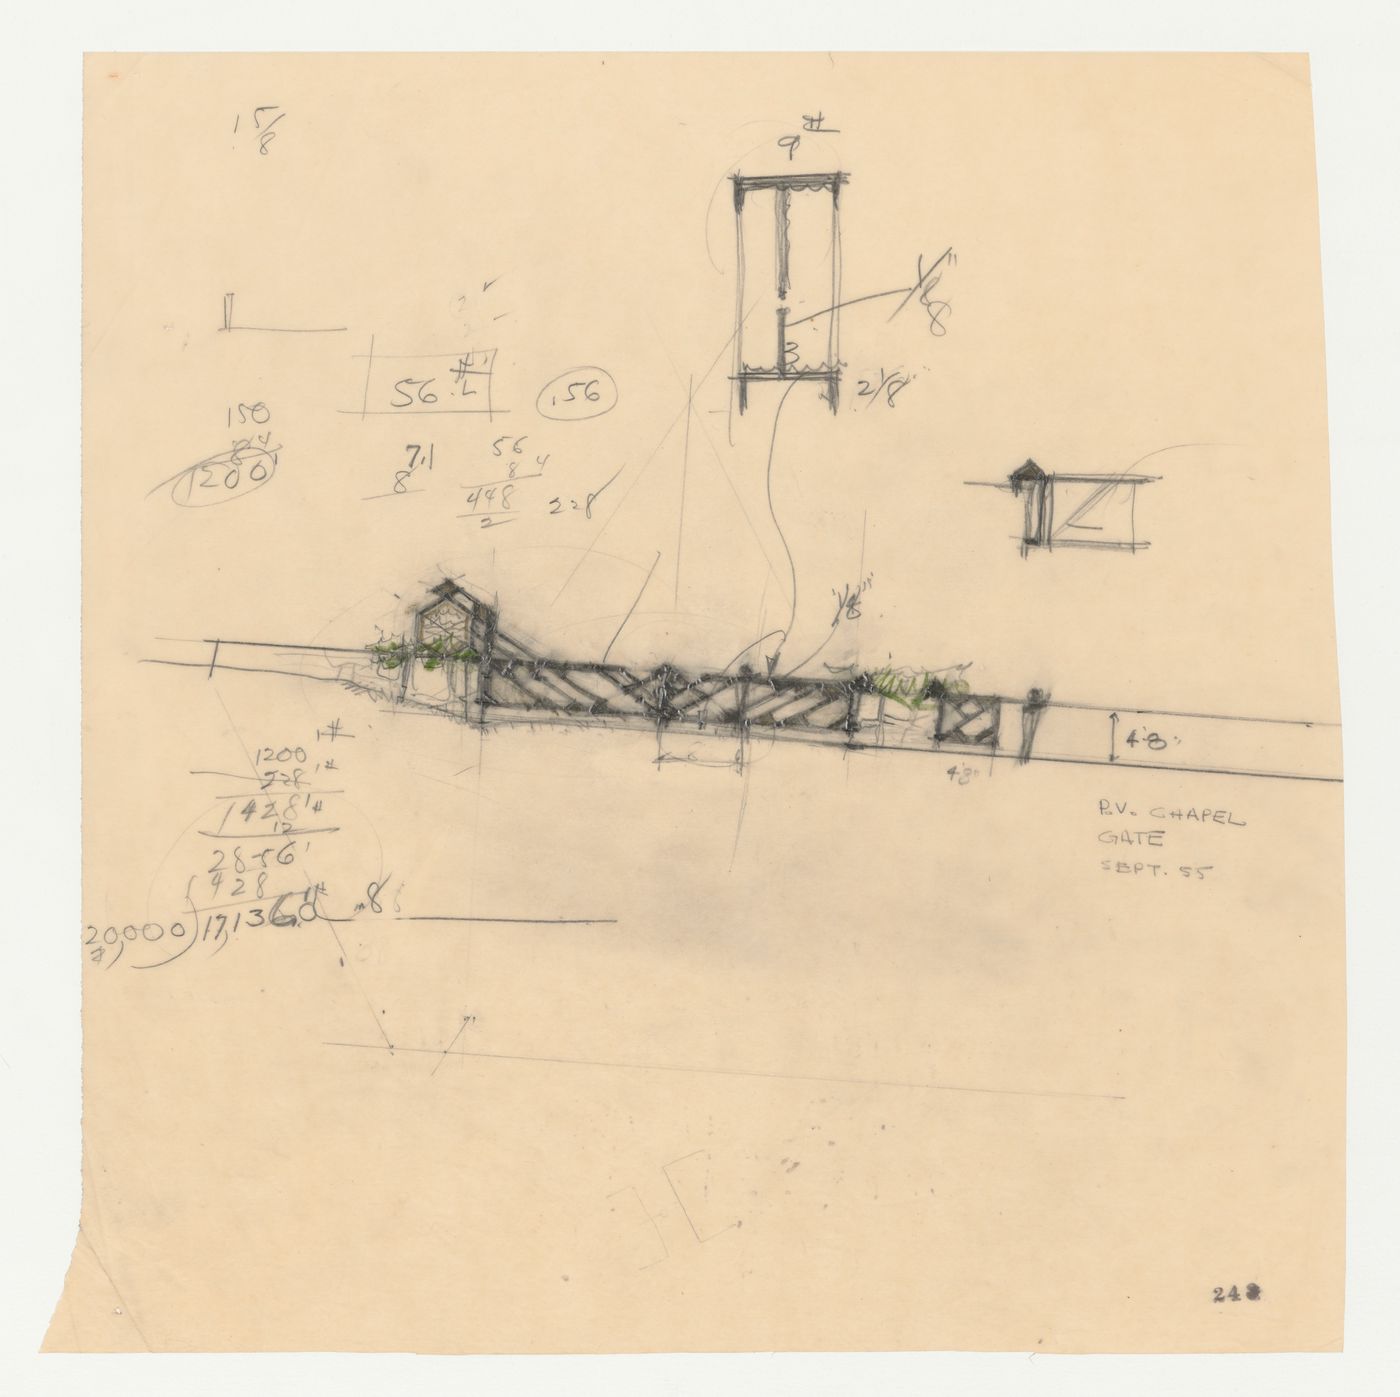 Wayfarers' Chapel, Palos Verdes, California: Sketch elevation for the entrance gate and sign, with two sketches, probably for gate components